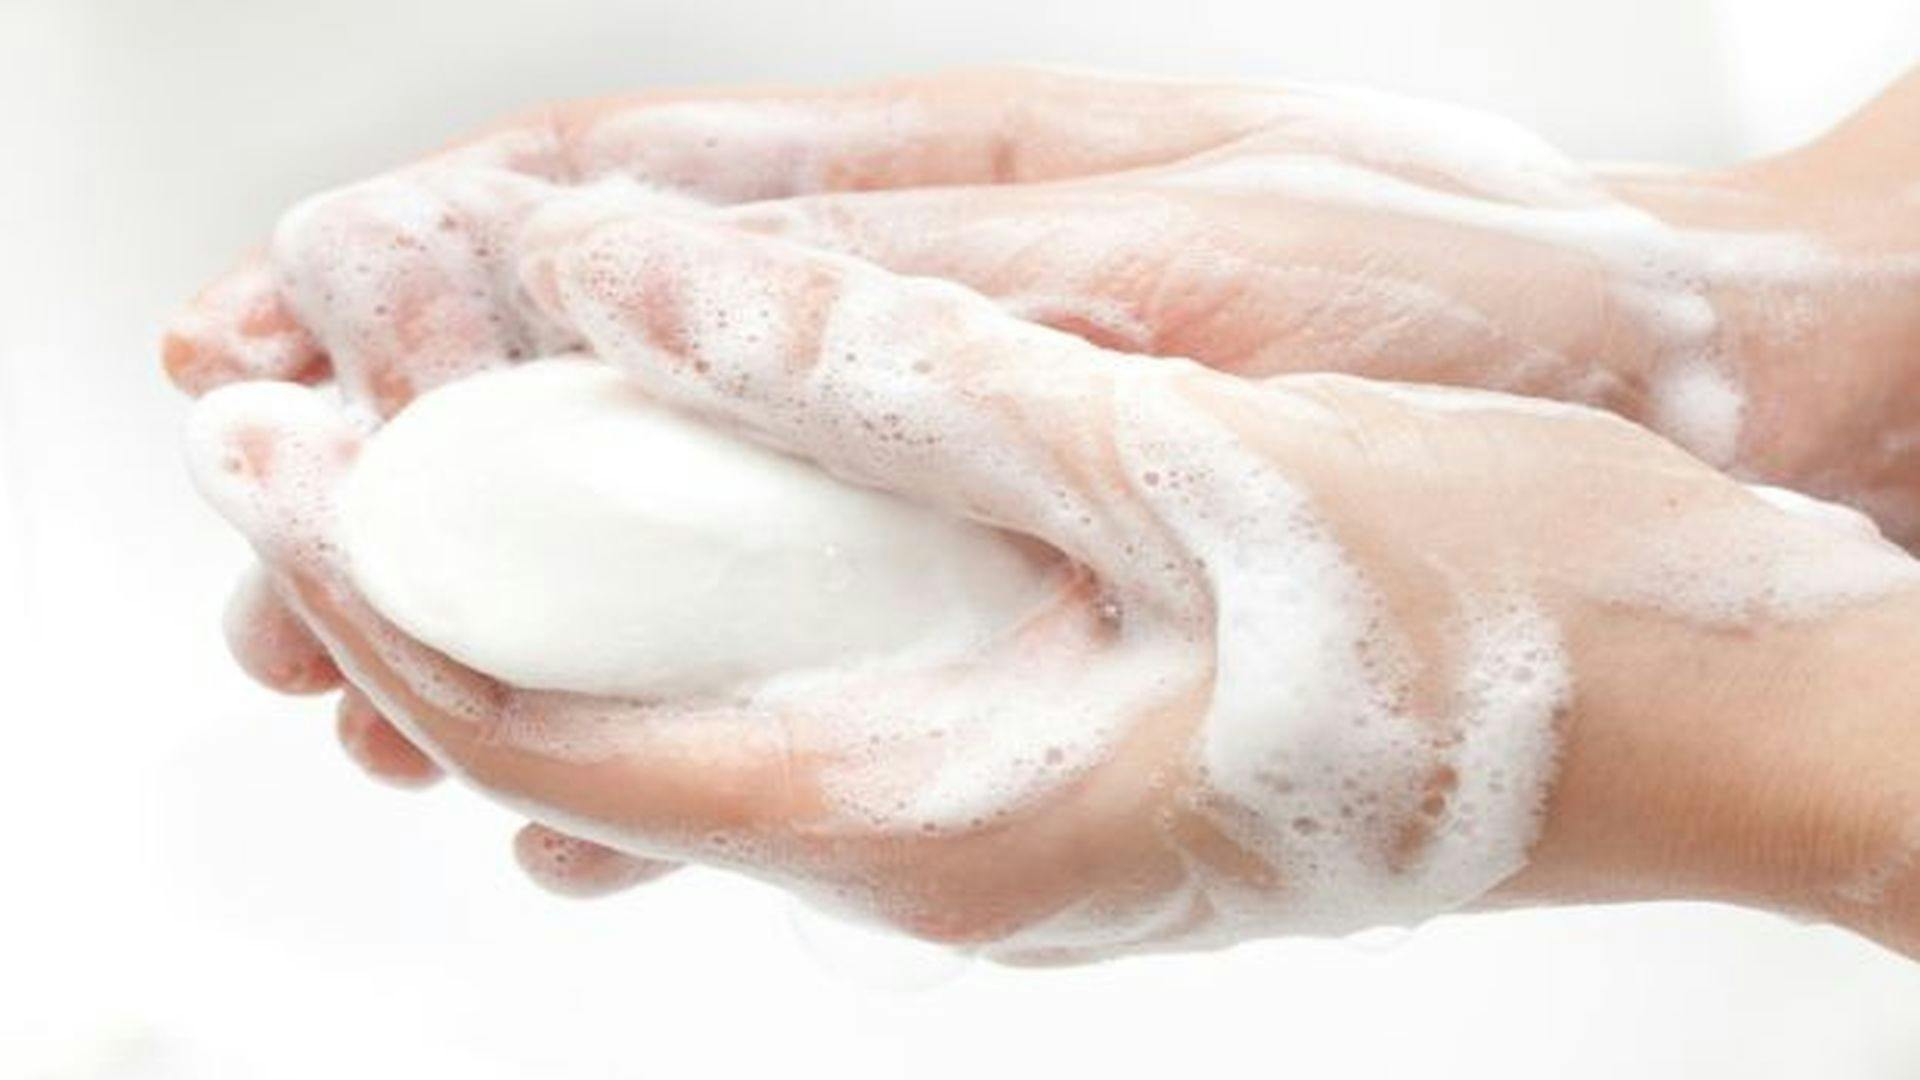 Study Finds Most Families in Low-Income Countries Don't Have Soap at Home